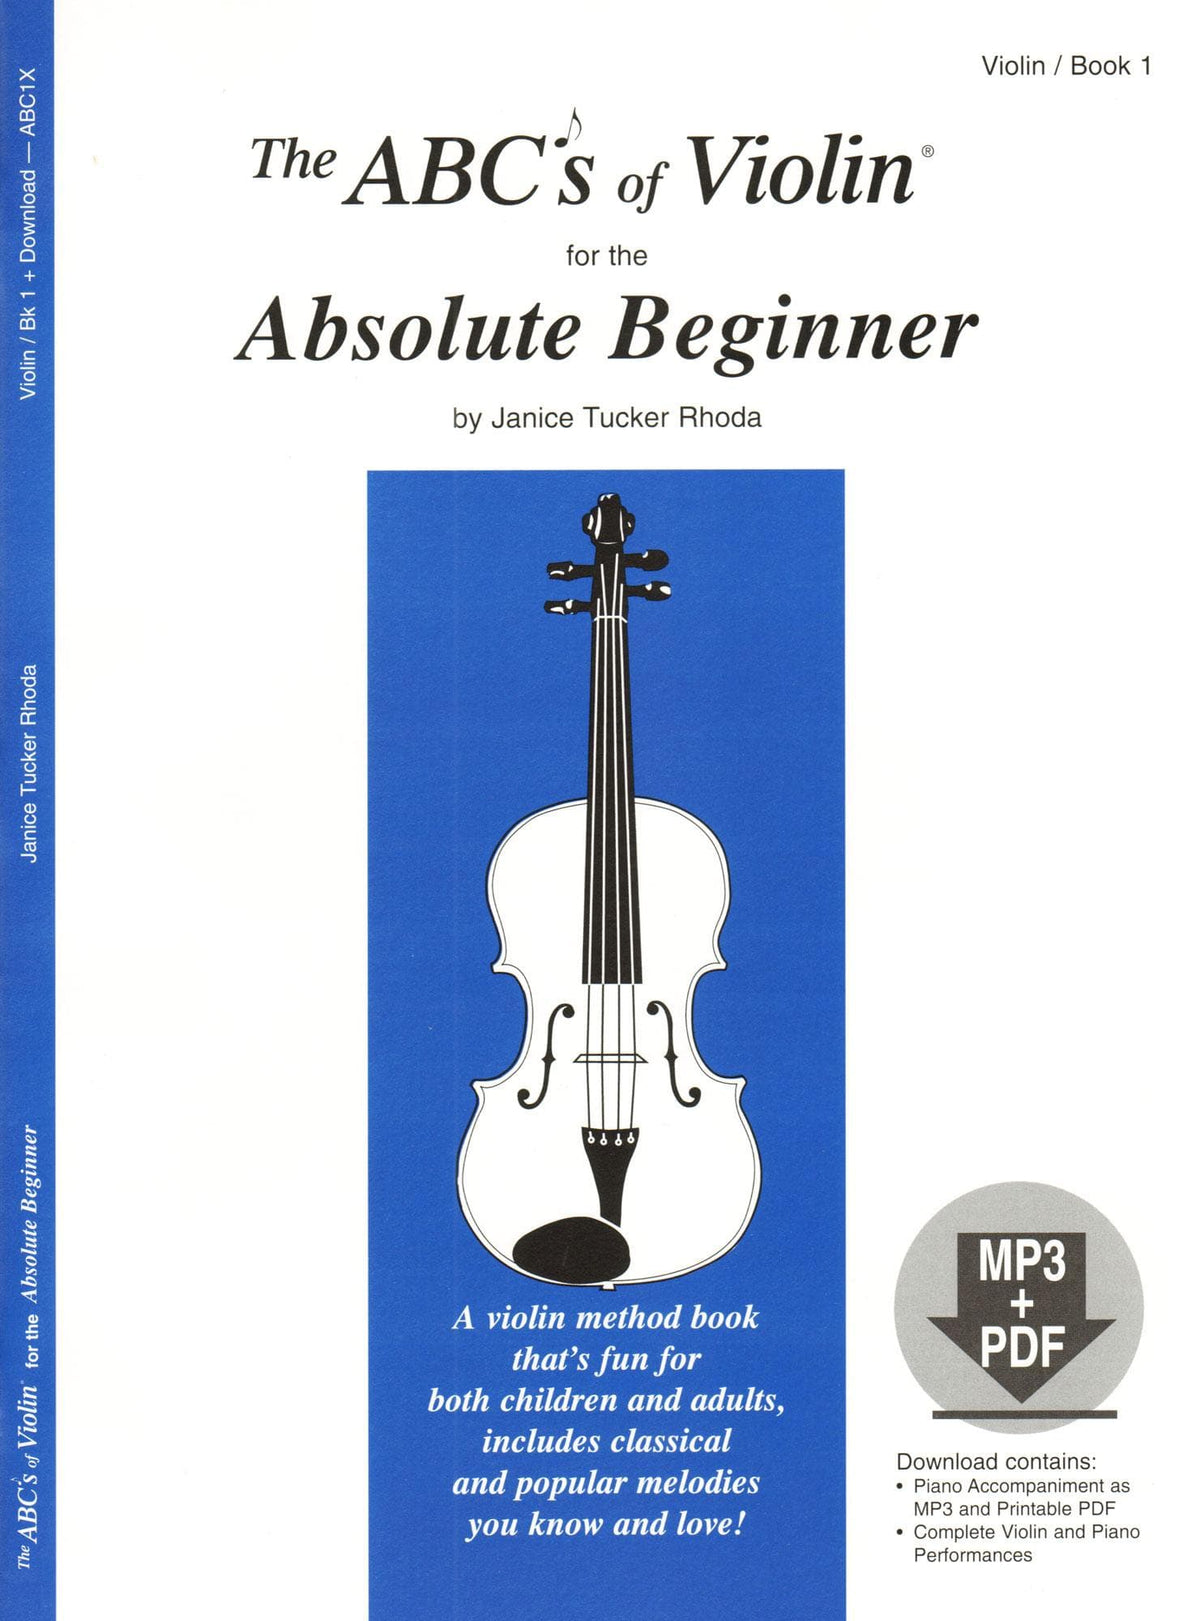 Rhoda, Janice Tucker - The ABCs of Violin for the Absolute Beginner, Book 1 - with Online Audio & Accompaniment - Carl Fischer Edition